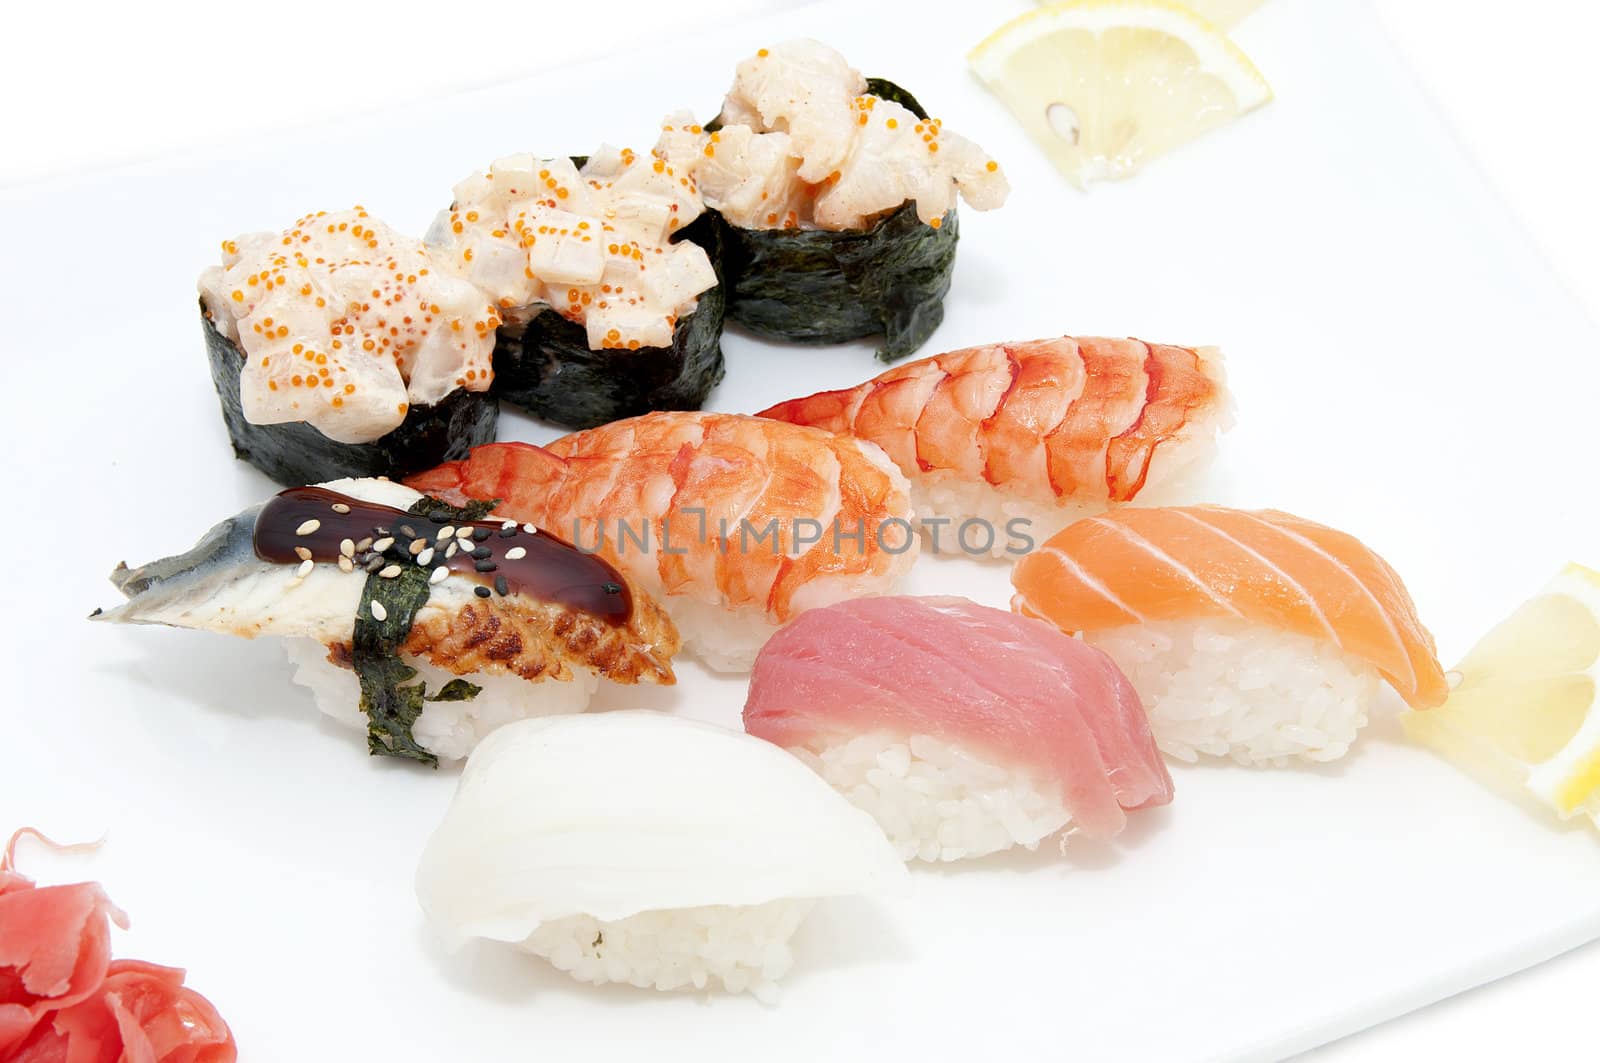 Japanese sushi fish and seafood by Lester120